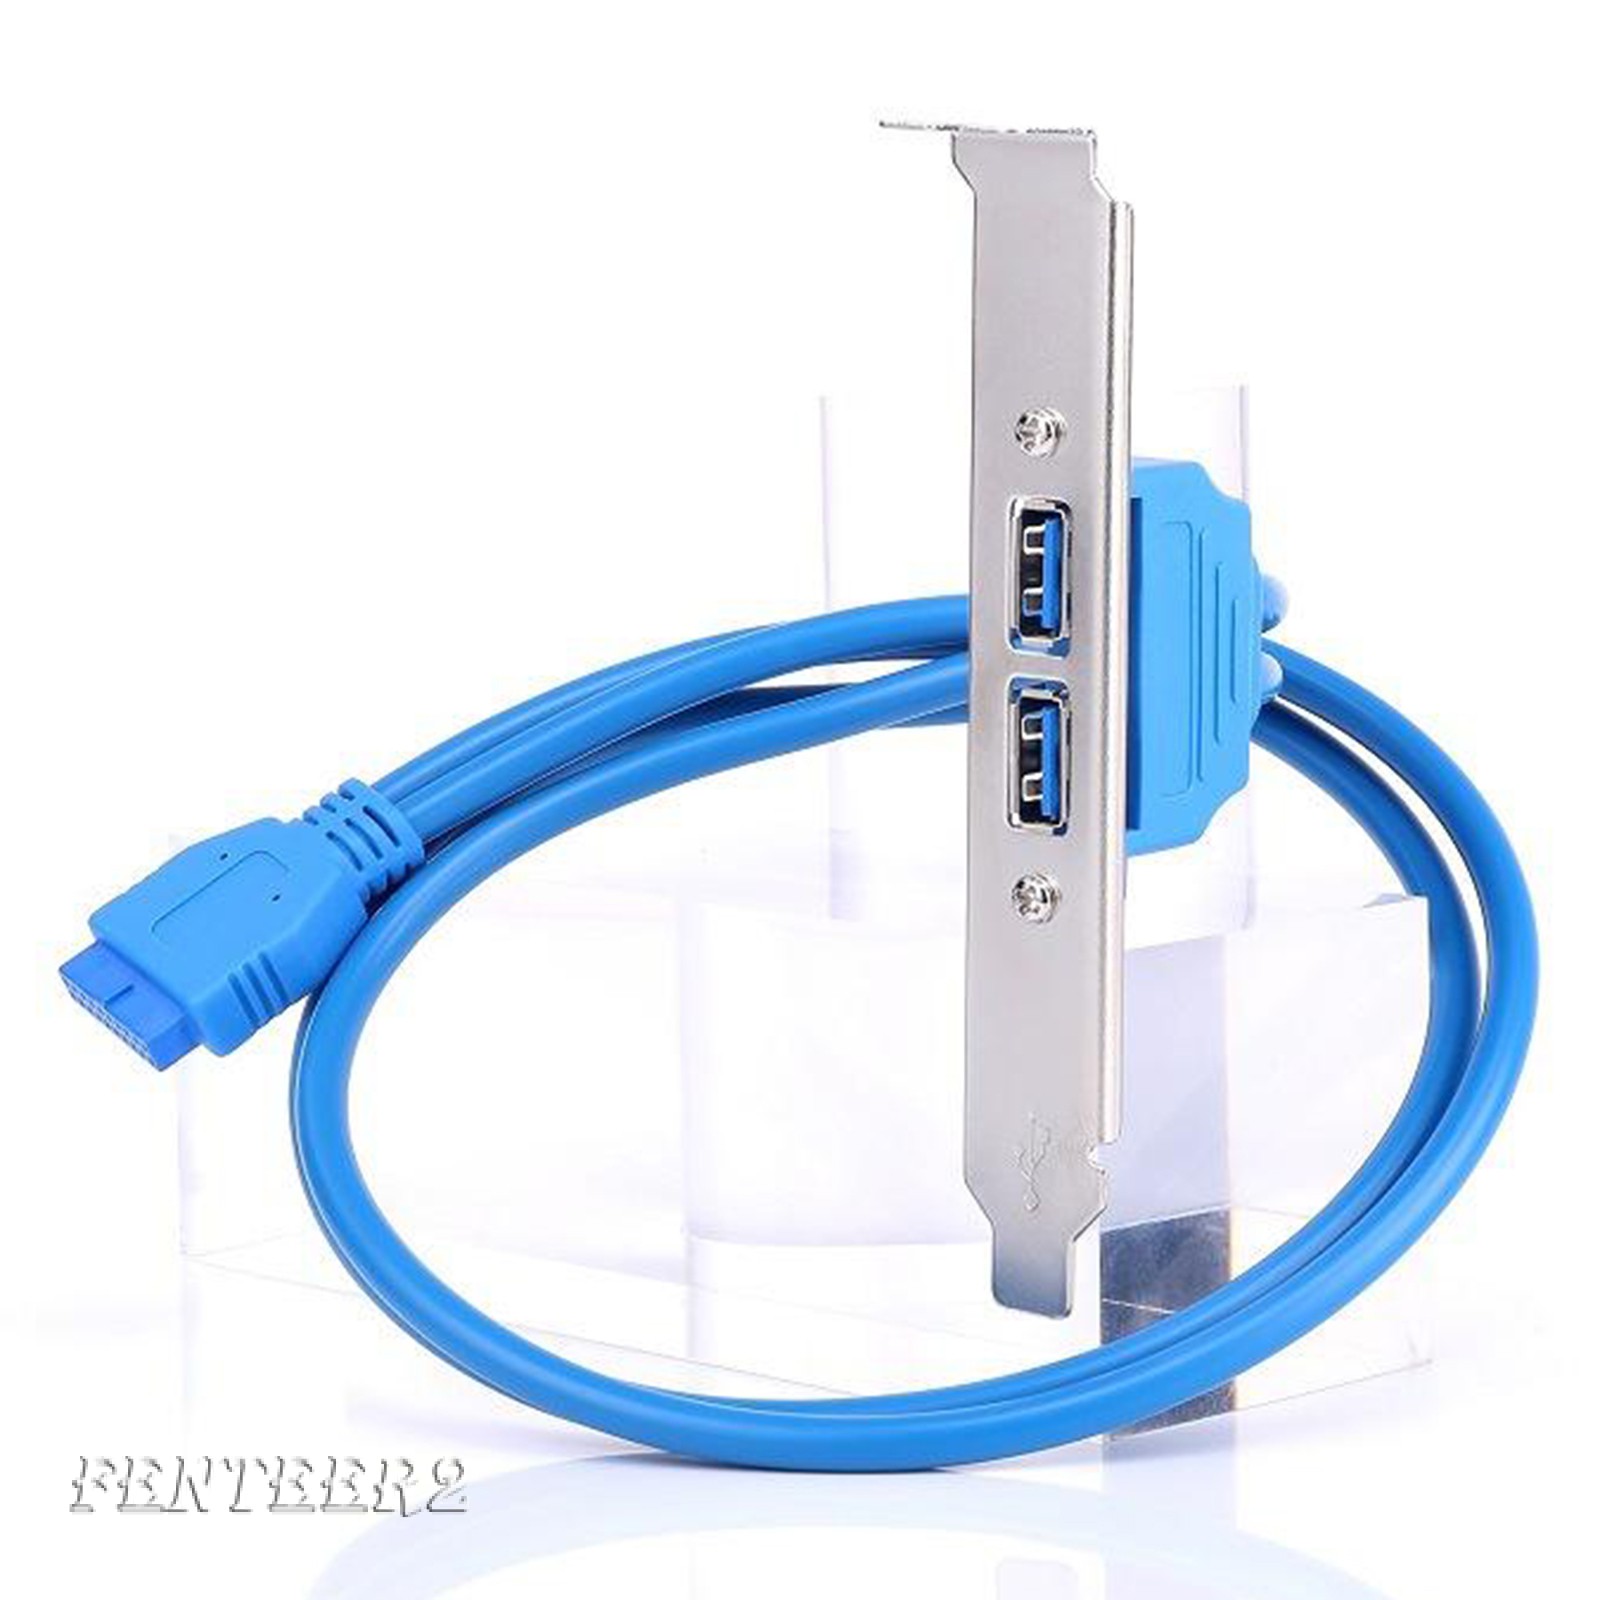 (Fenteer2 3c) Dual 2 Ports Usb 3.0 Back Panel To 20pin Header Cable With Bracket